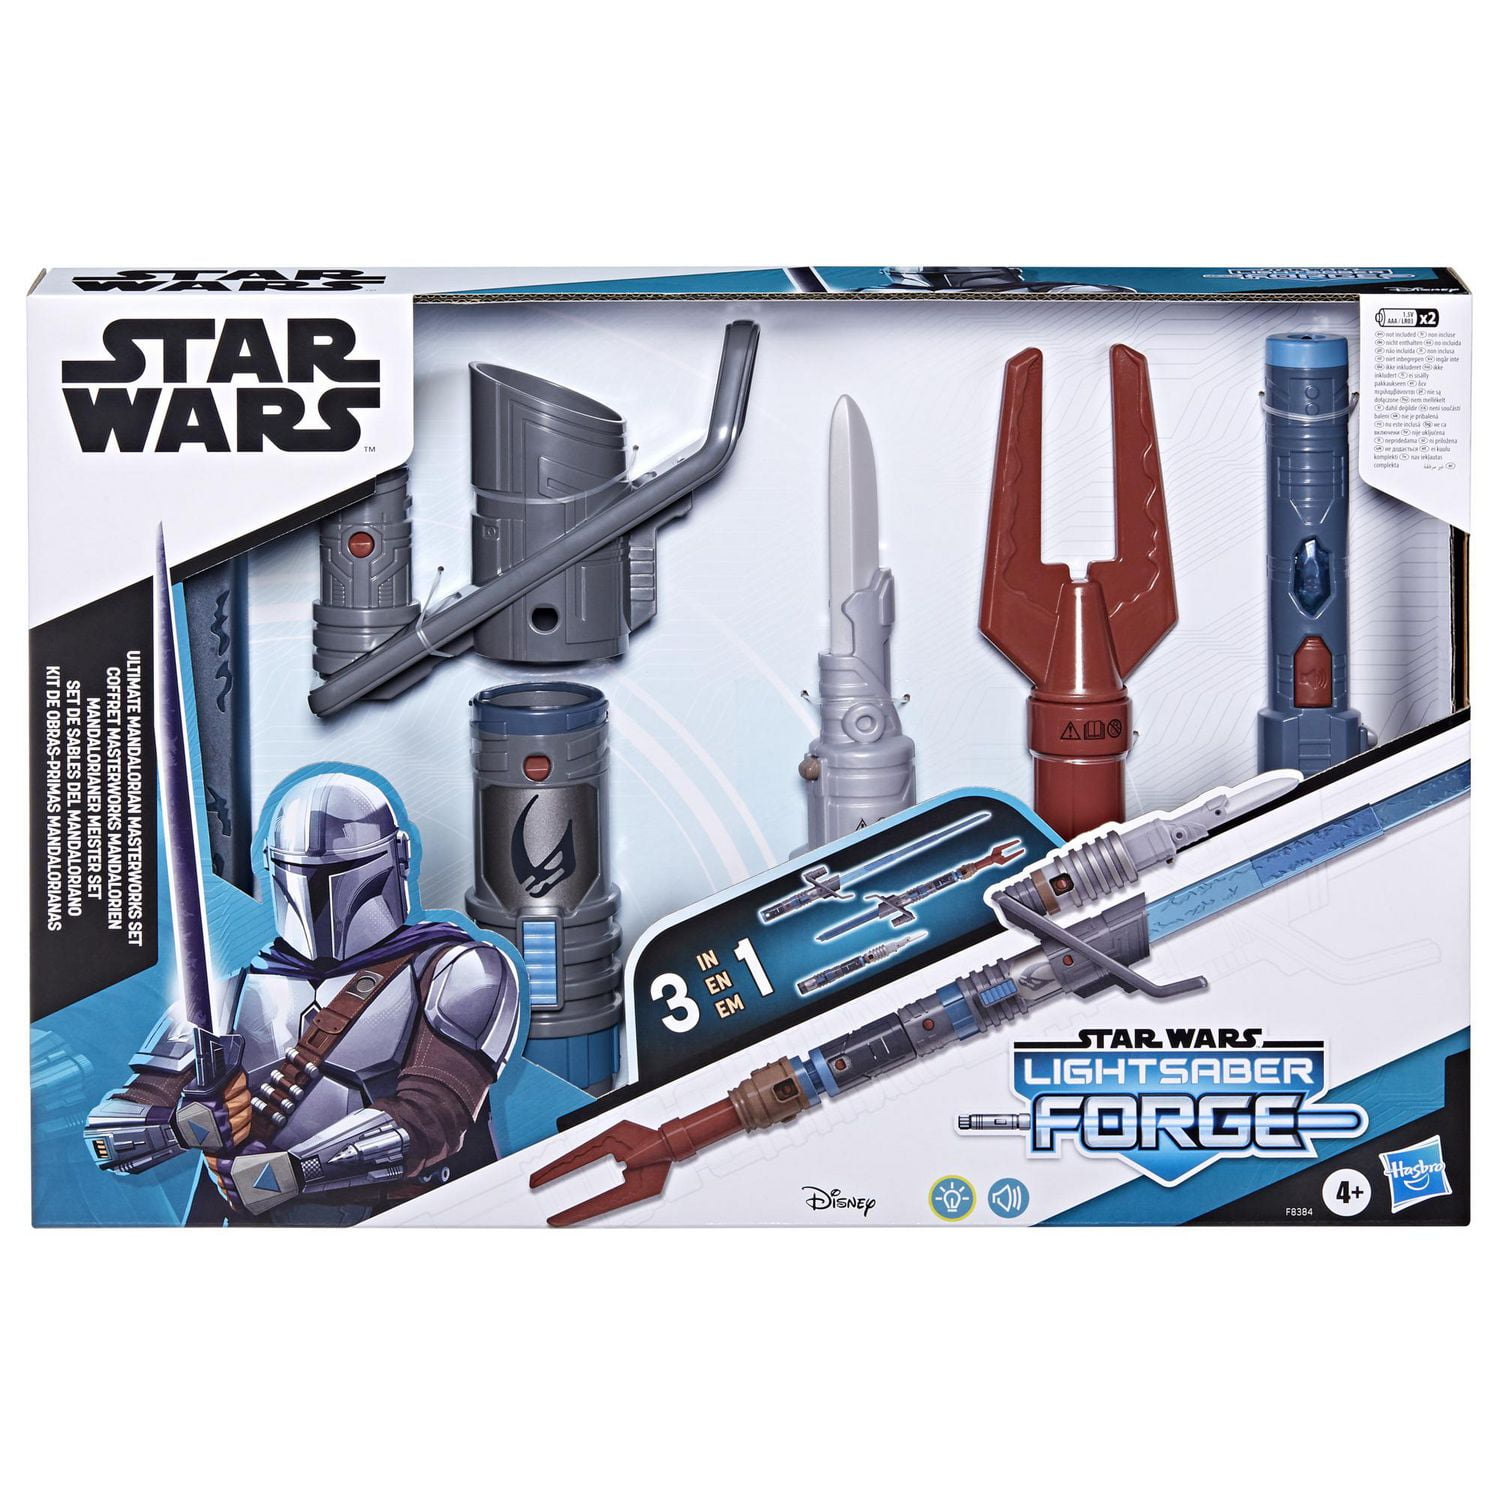 Star Wars Lightsaber Forge Ultimate Mandalorian Masterworks Set, Officially  Licensed Electronic Lightsaber, Toys for 4 Year Old Boys and Girls and Up 